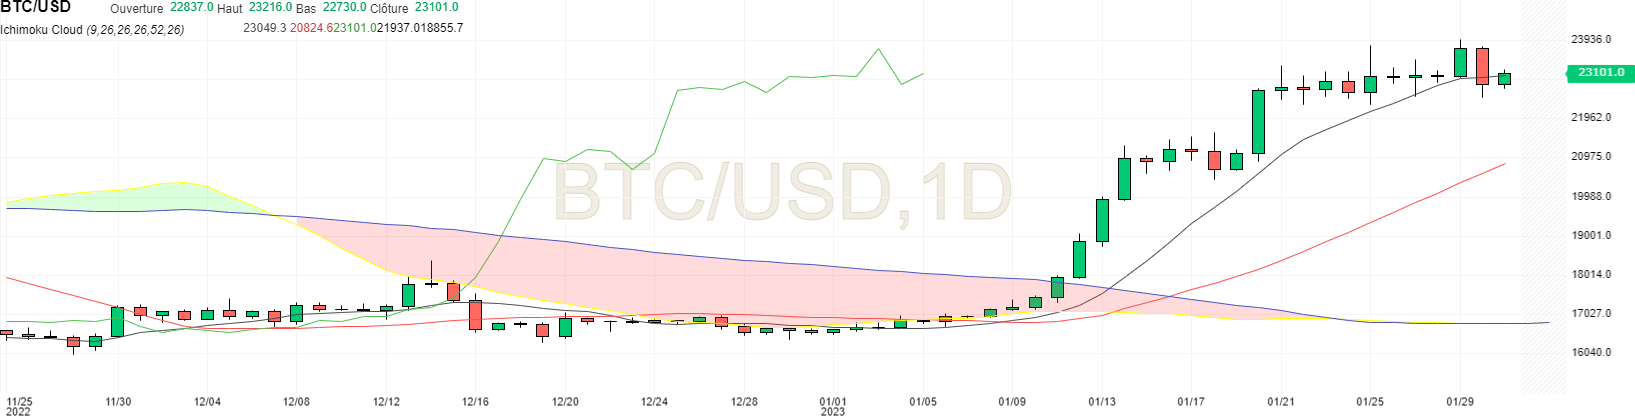 Bitcoin price in daily unit